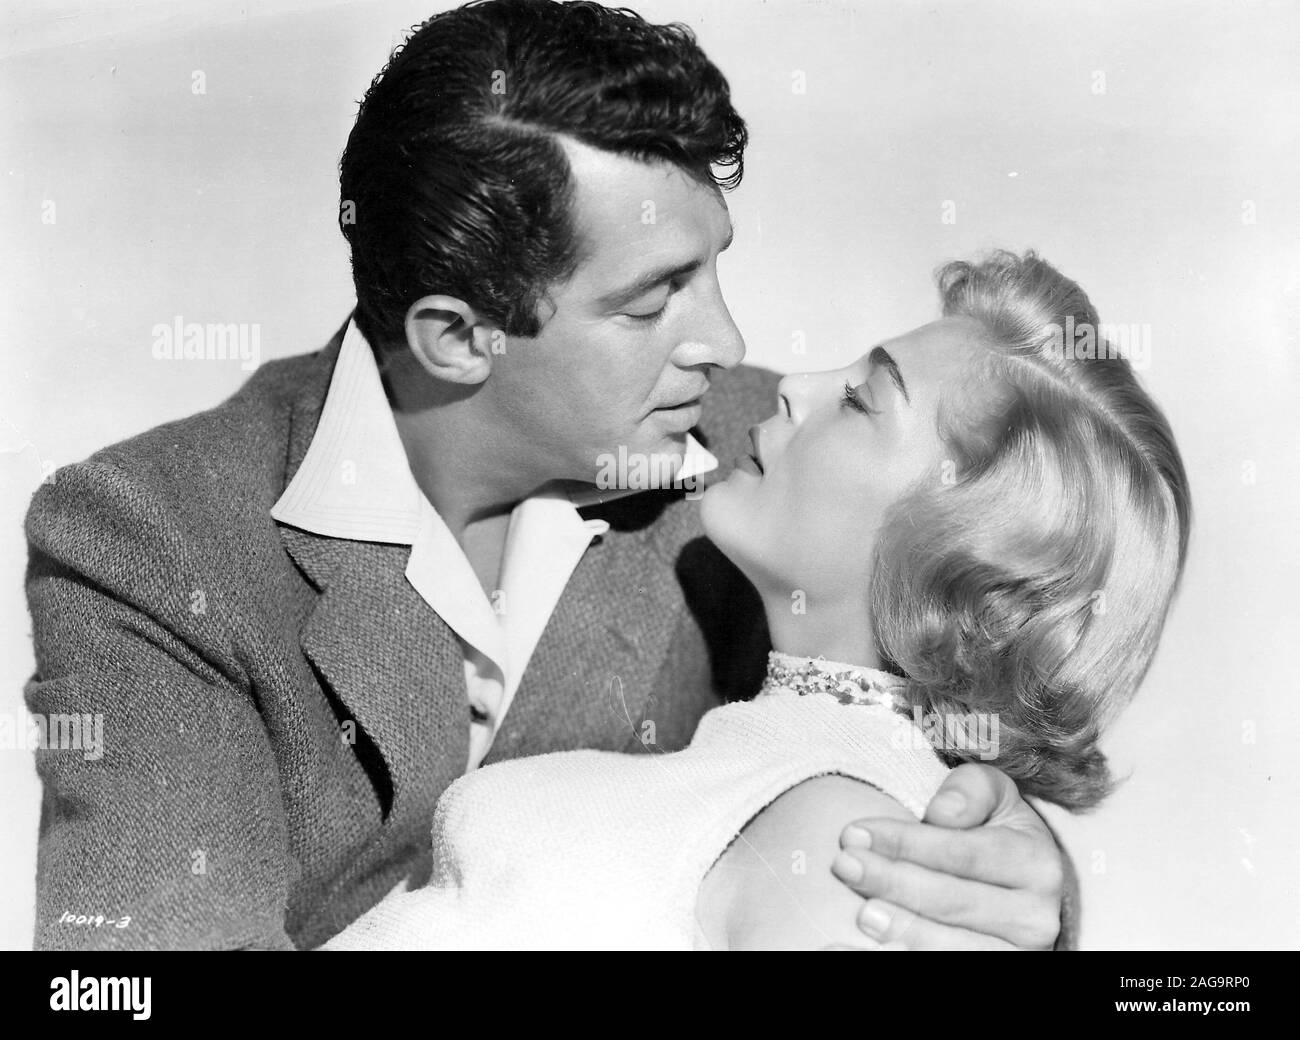 DEAN MARTIN and LIZABETH SCOTT in SCARED STIFF (1953), directed by GEORGE MARSHALL. Credit: PARAMOUNT PICTURES / Album Stock Photo